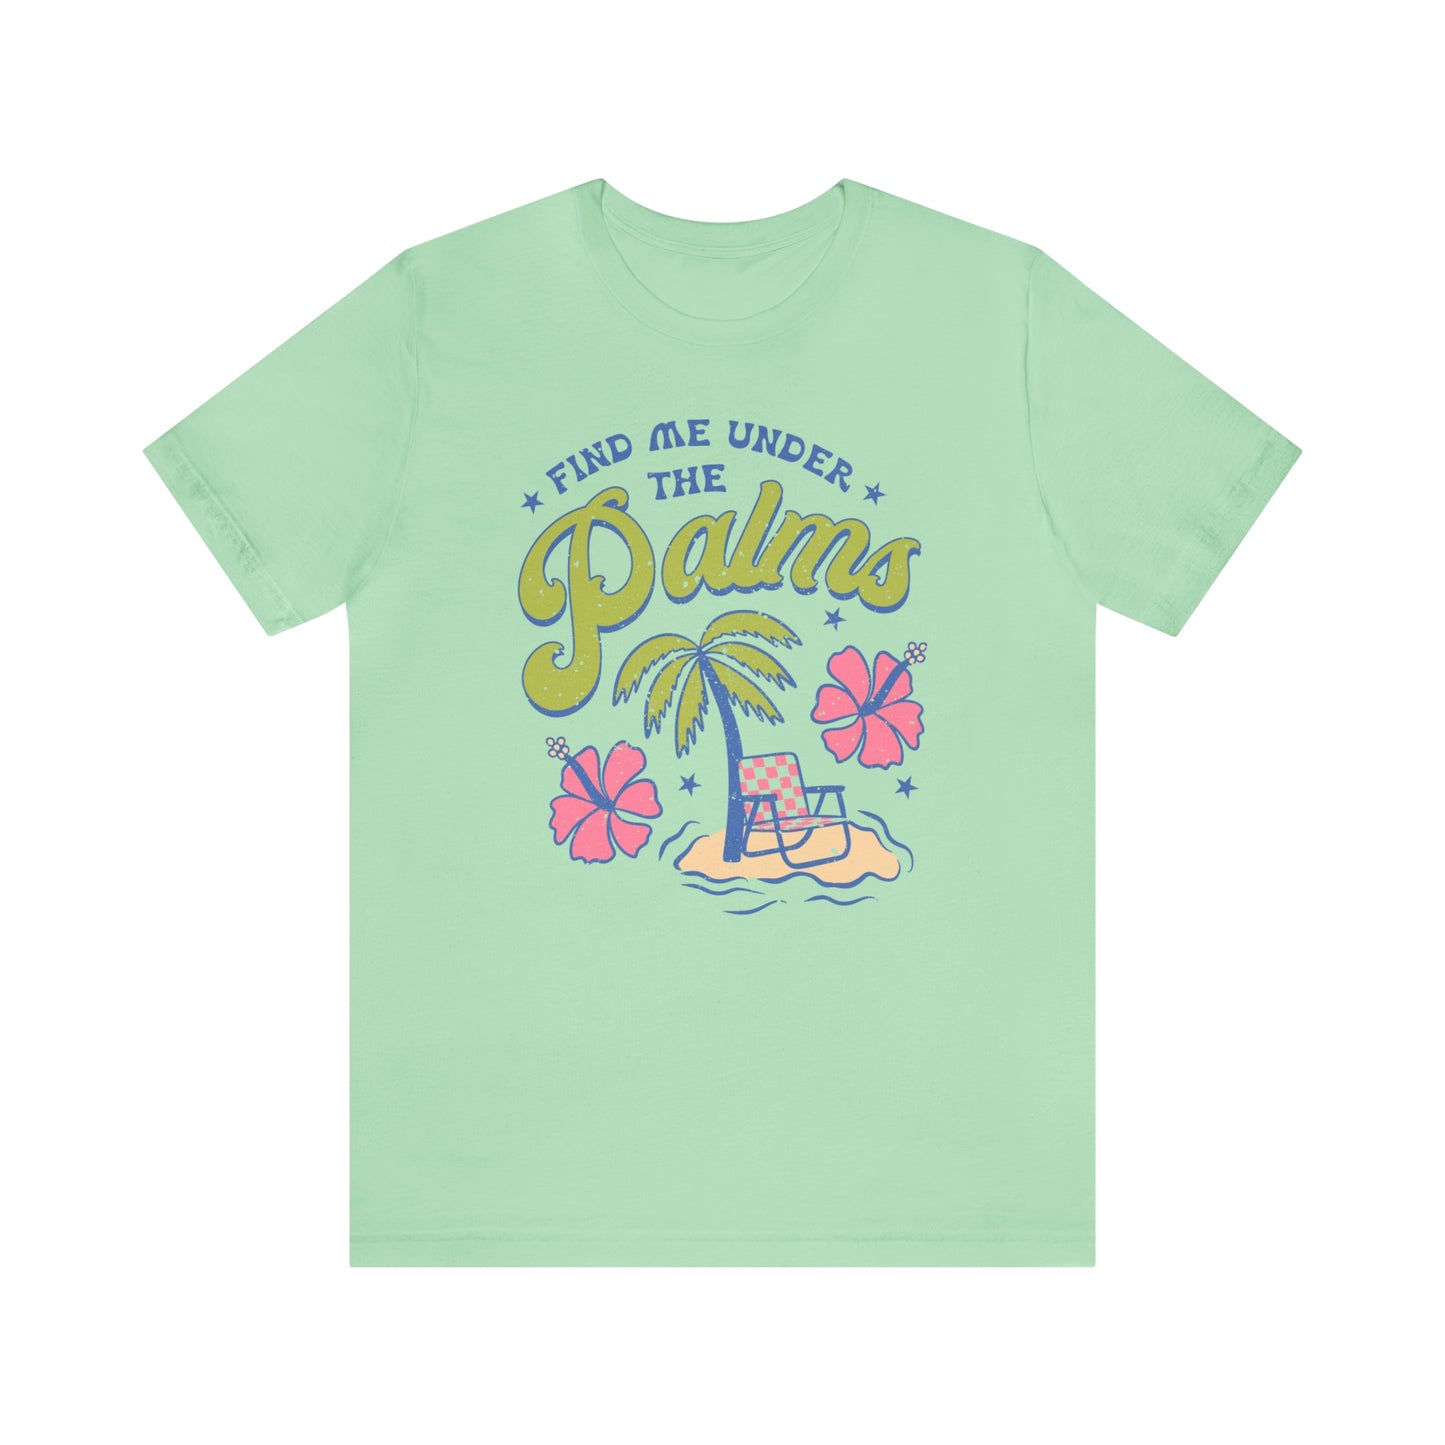 "Find Me Under the Palms" Bella Canvas Short Sleeve Tee